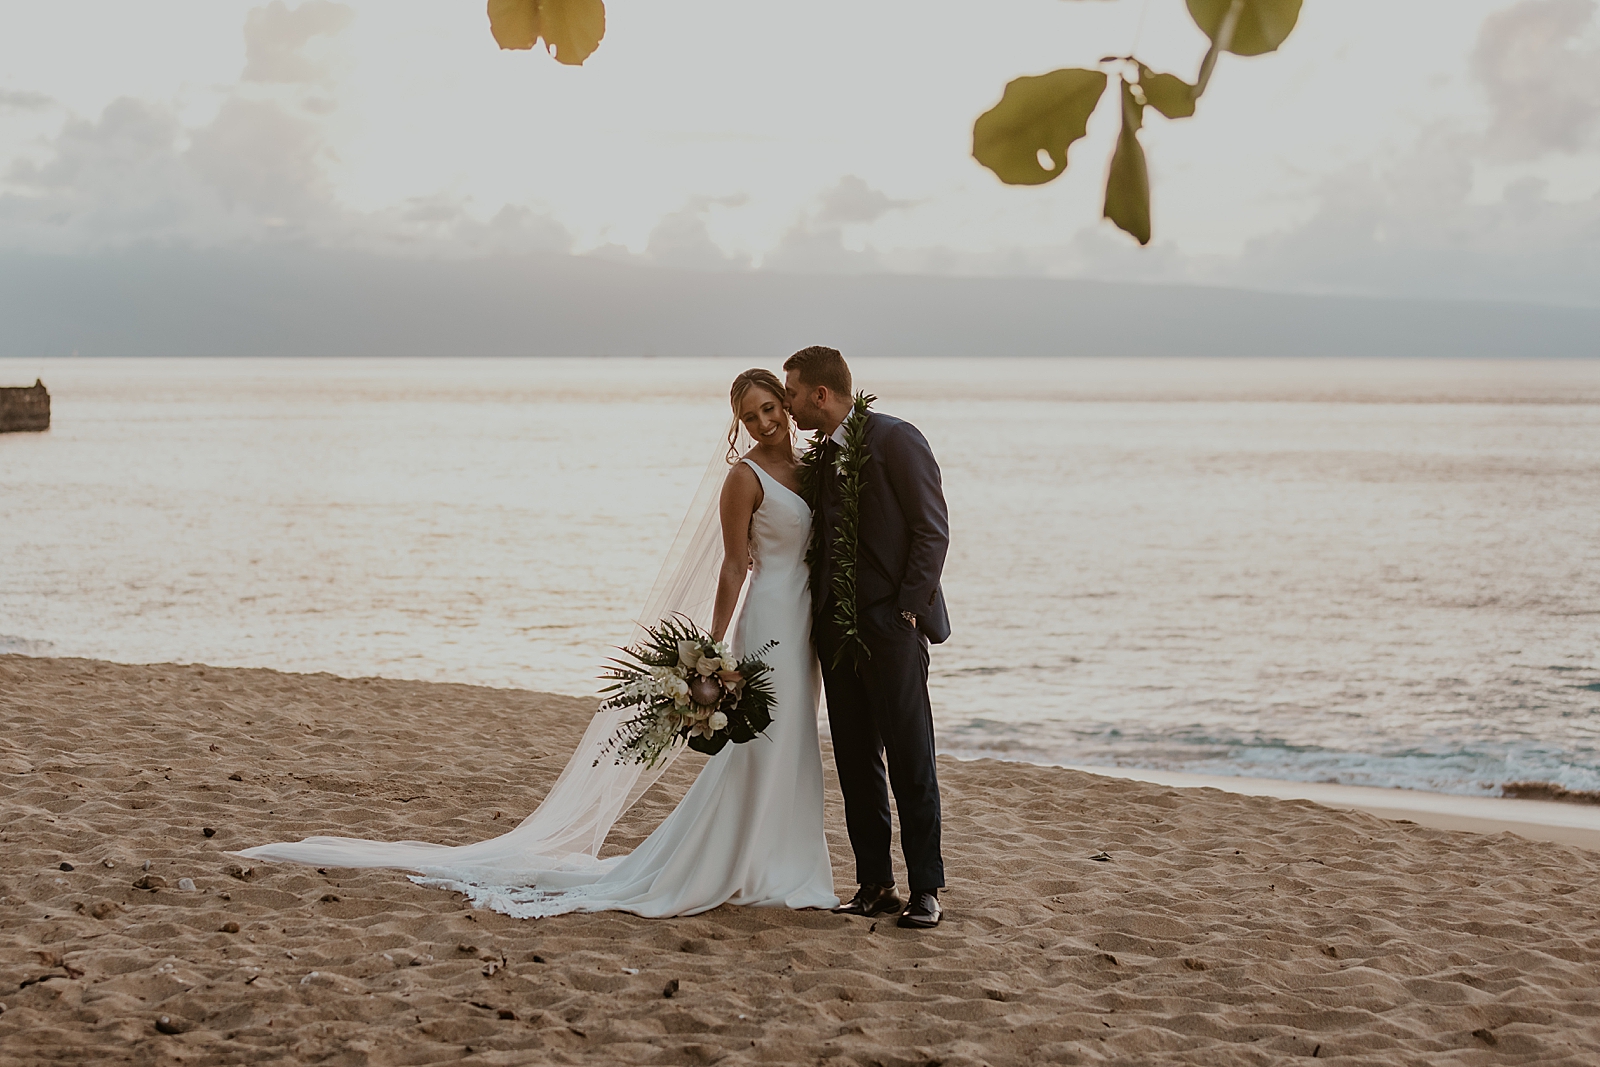 Groom kissing Bride on the cheek on the beach by the ocean